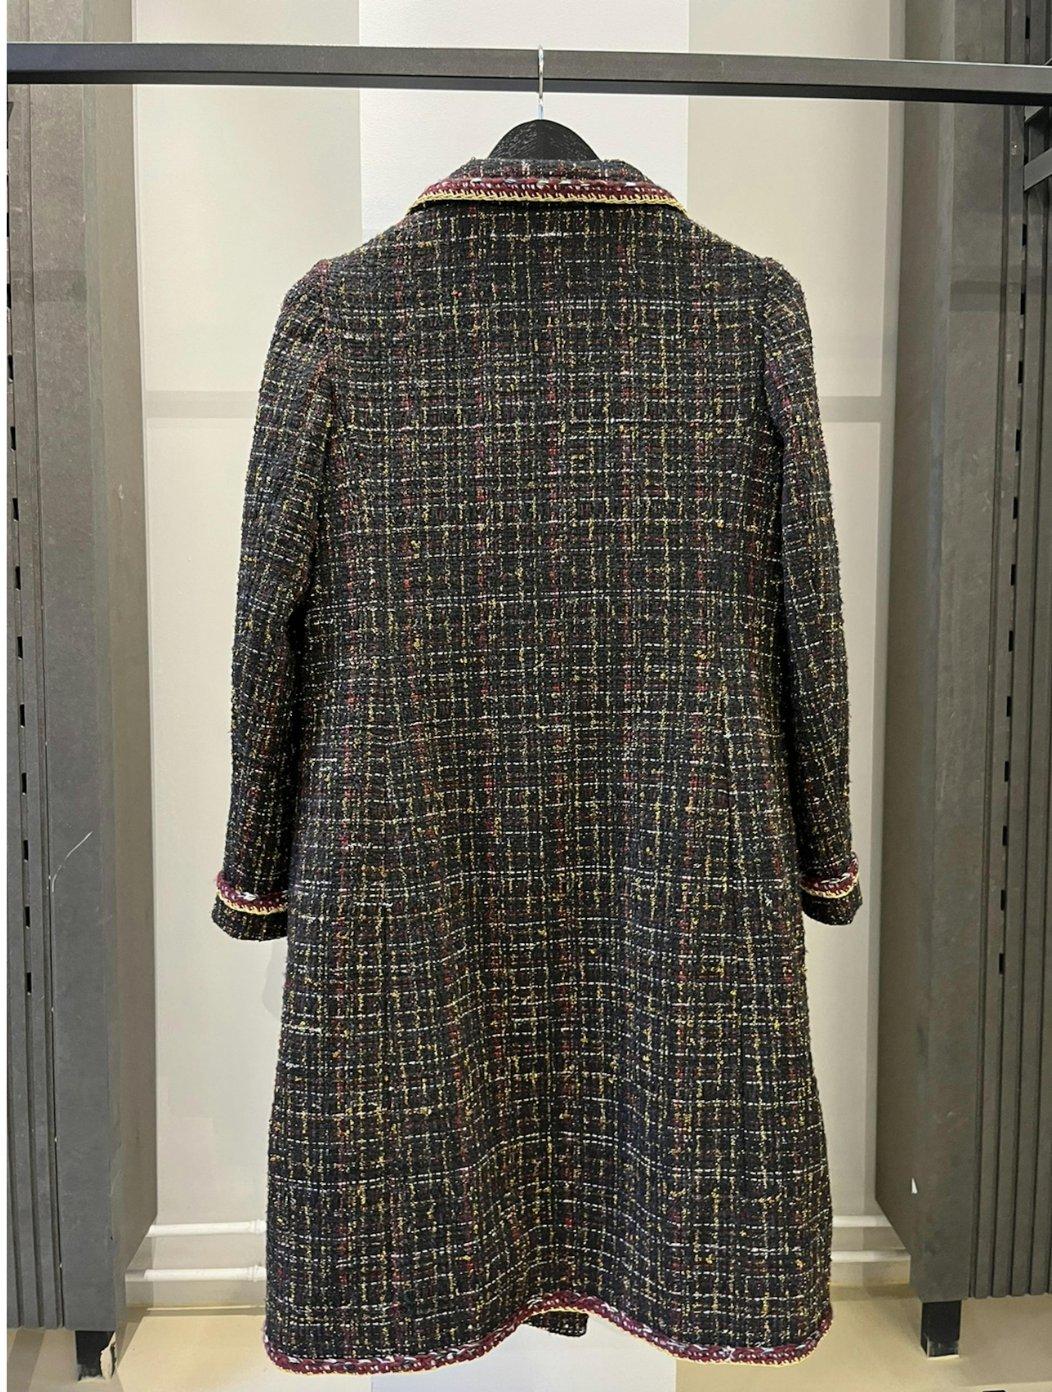 Chanel
Tweed Coat
Size IT 42

Beautiful Chanel tweed coat in a size IT42. In great condition, made in France. Made out of stunning materials, heavy coat. Made in France.